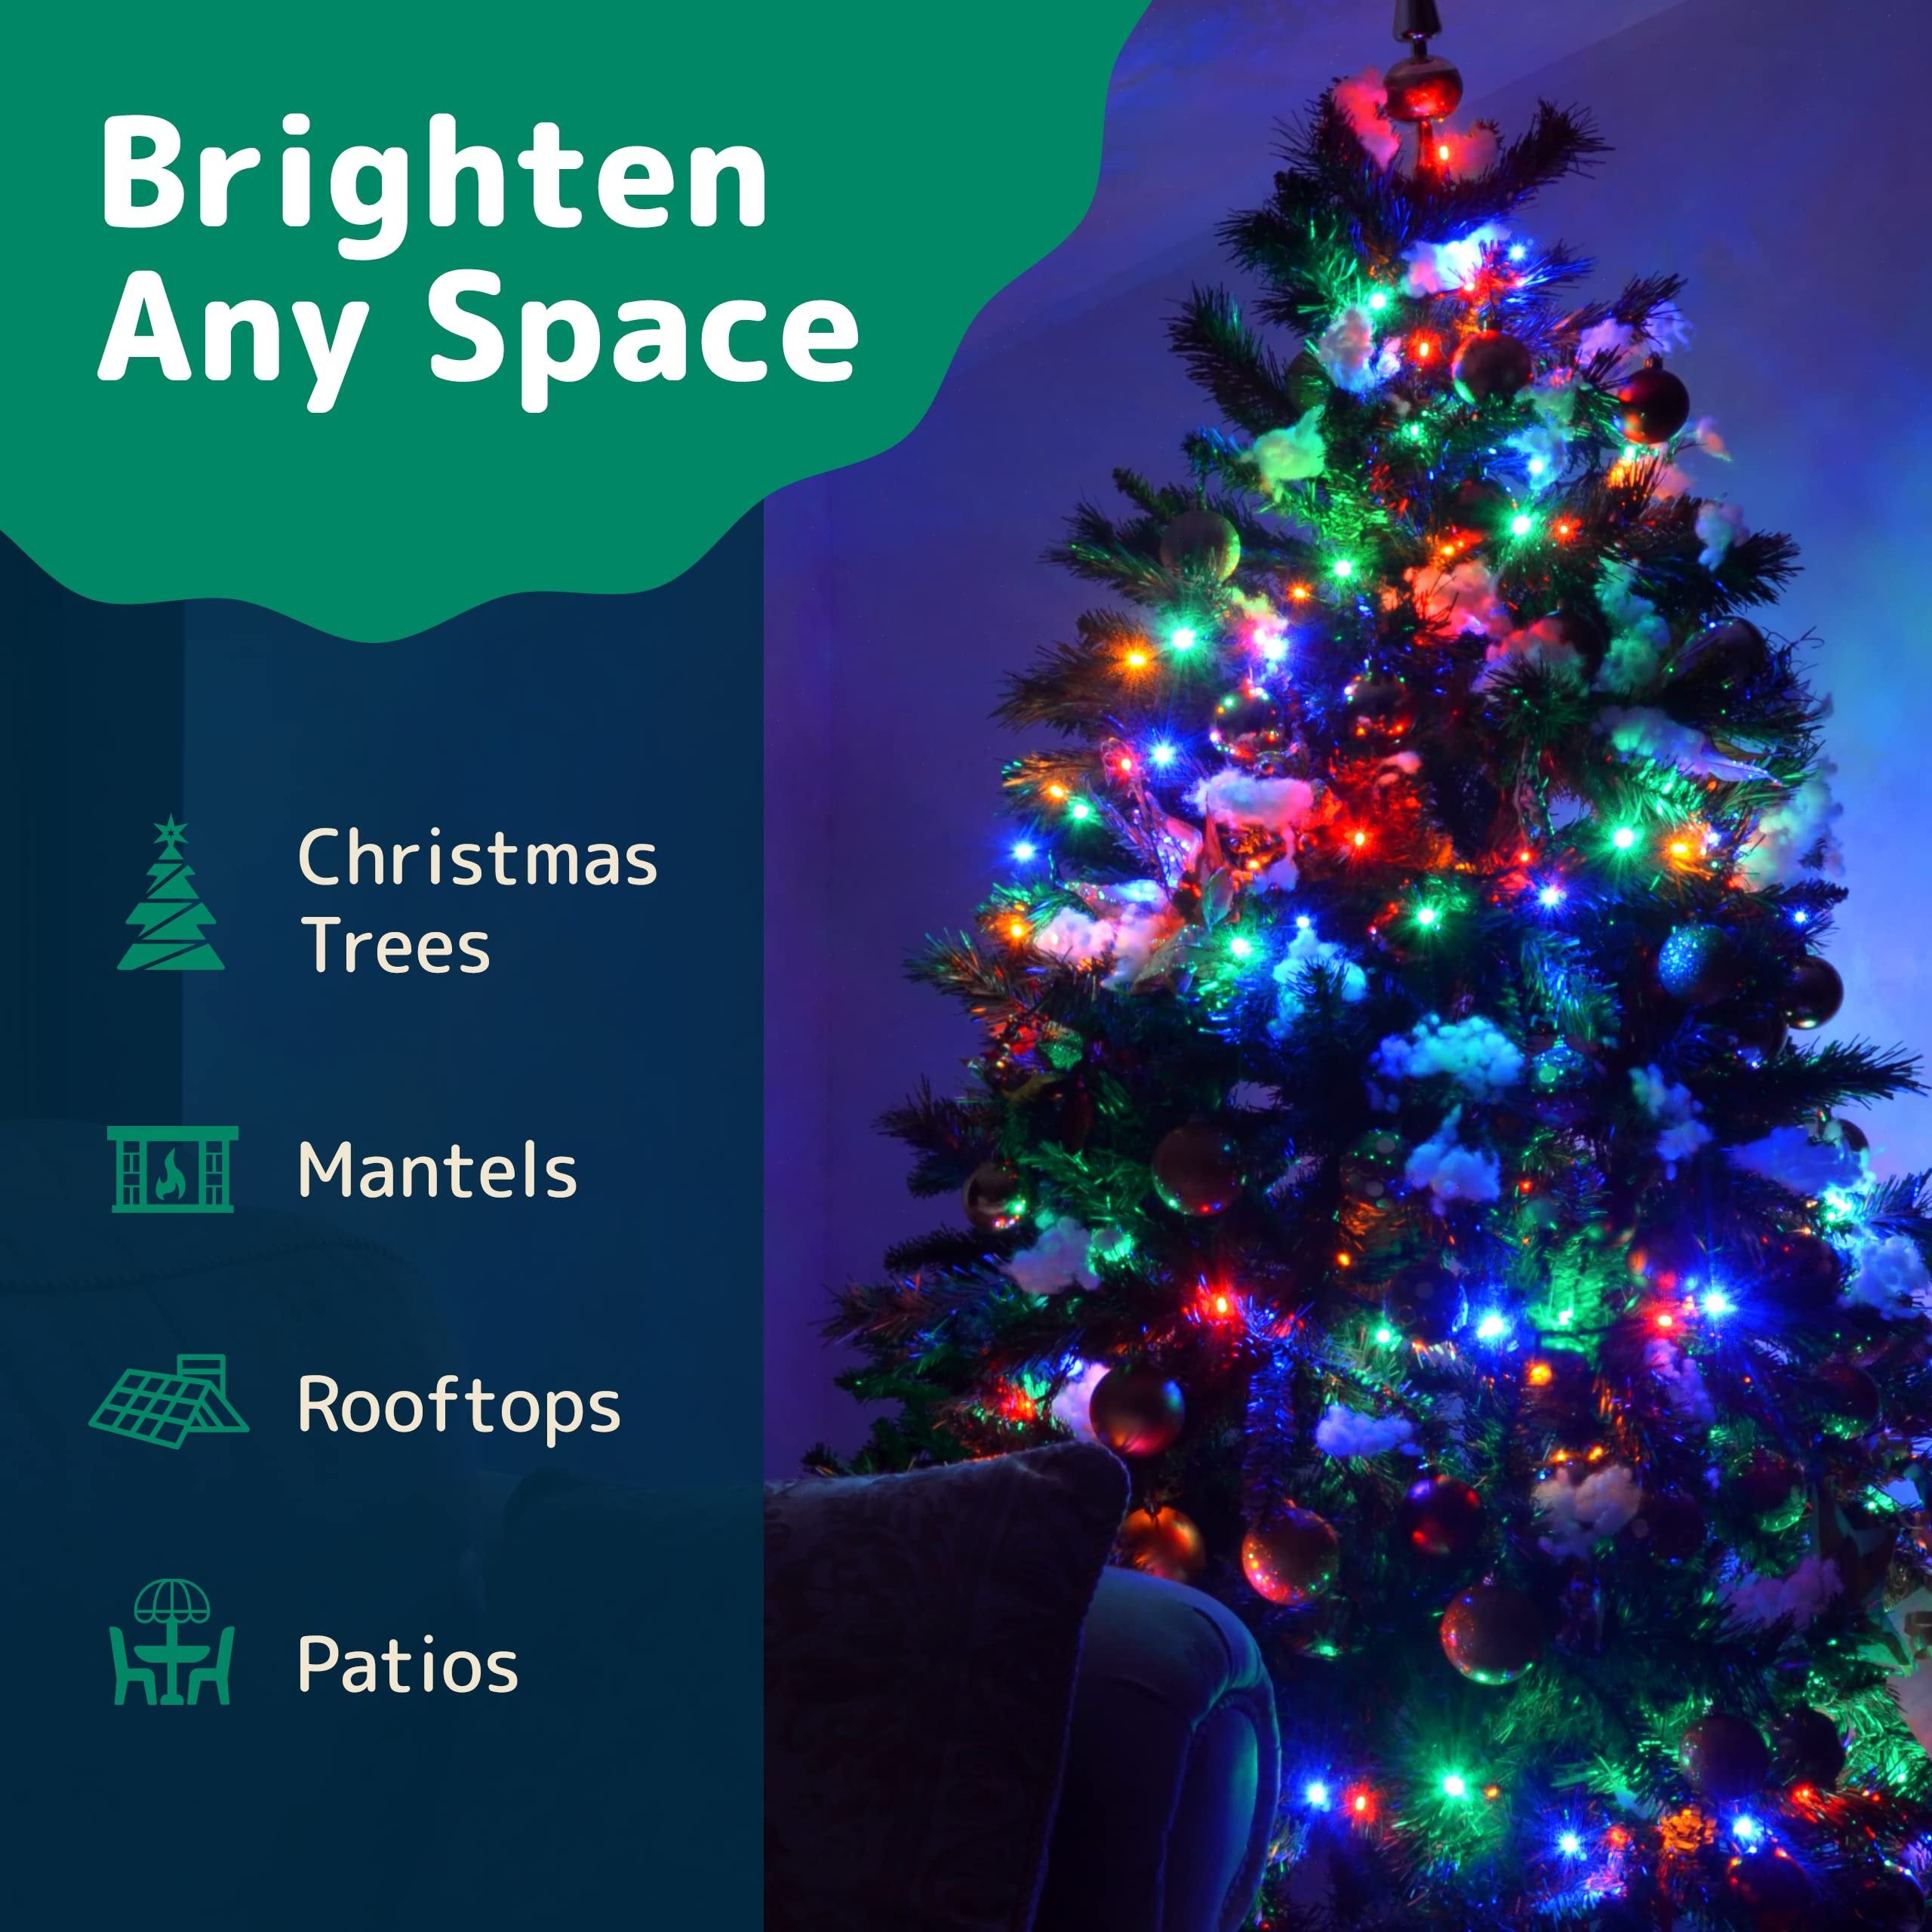 PREXTEX Bright & Colorful Christmas Lights (20 Feet, 100 Lights) - Fall Decor & Christmas Tree Lights with White Wire - Indoor/Outdoor String Lights - Multi-Color Twinkle Lights